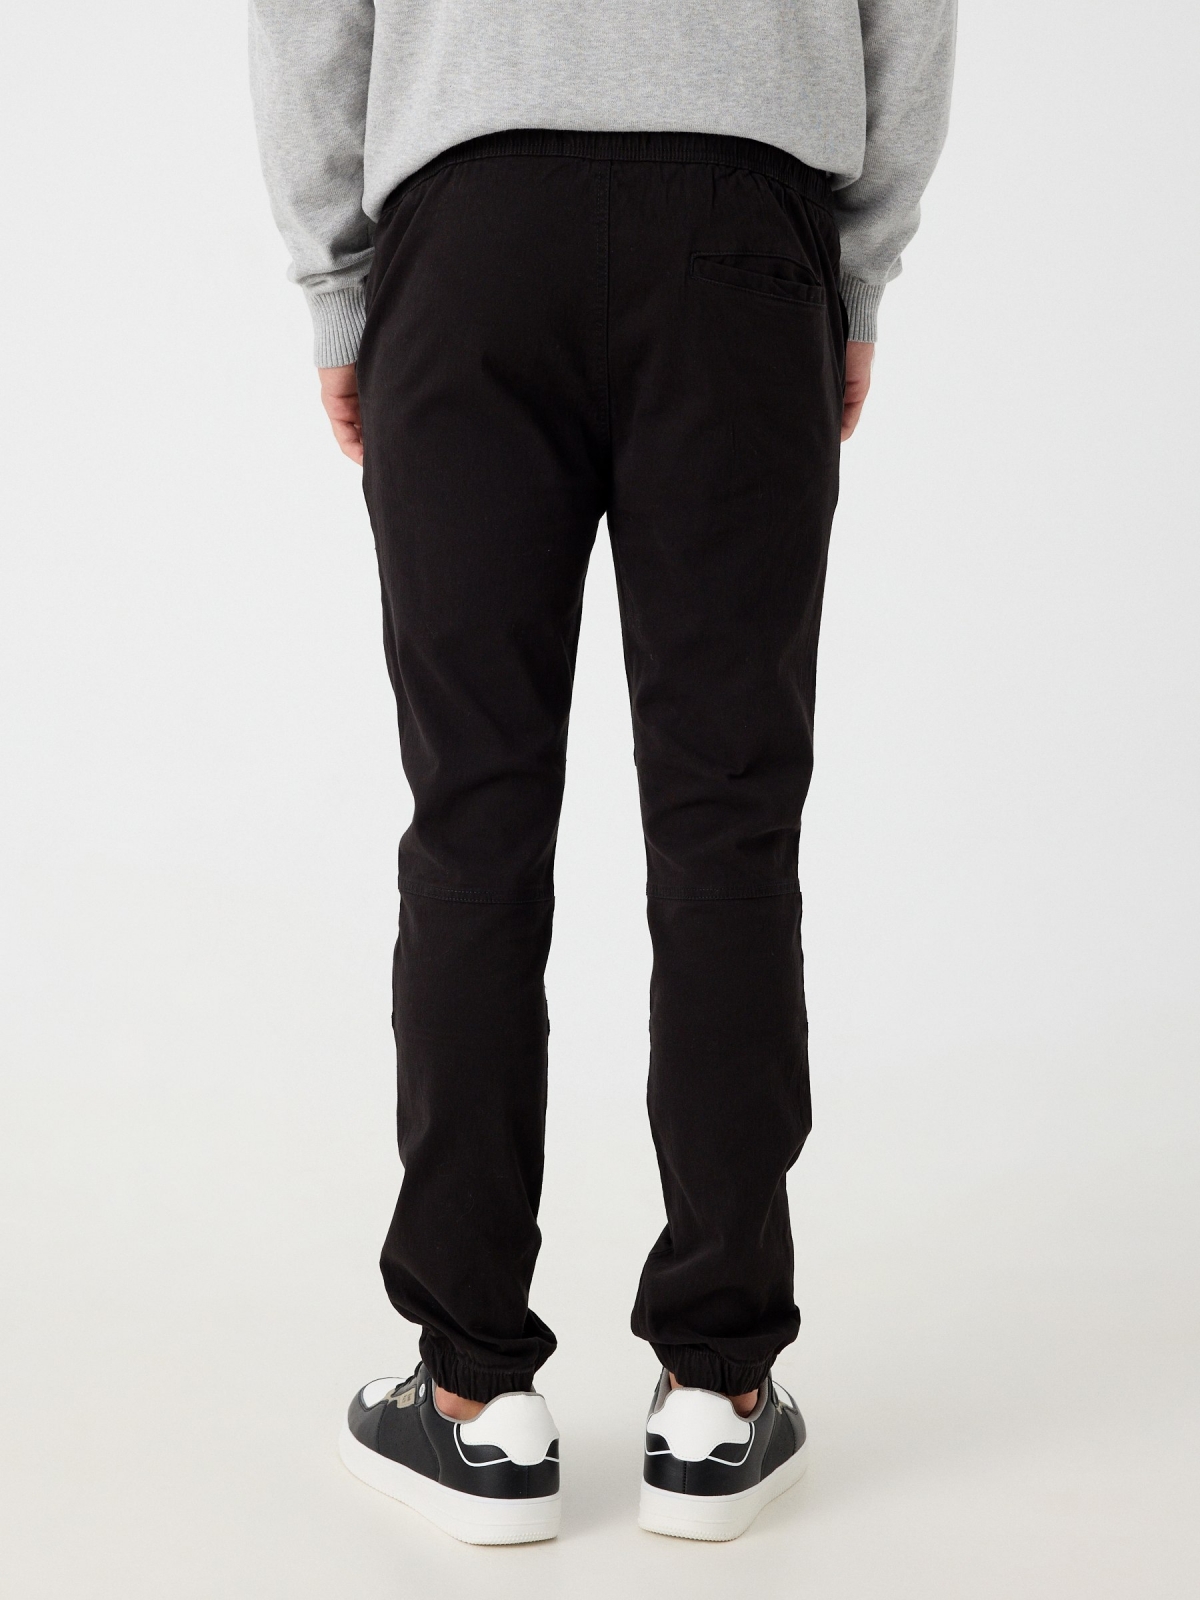 Knotted jogger pants black middle back view